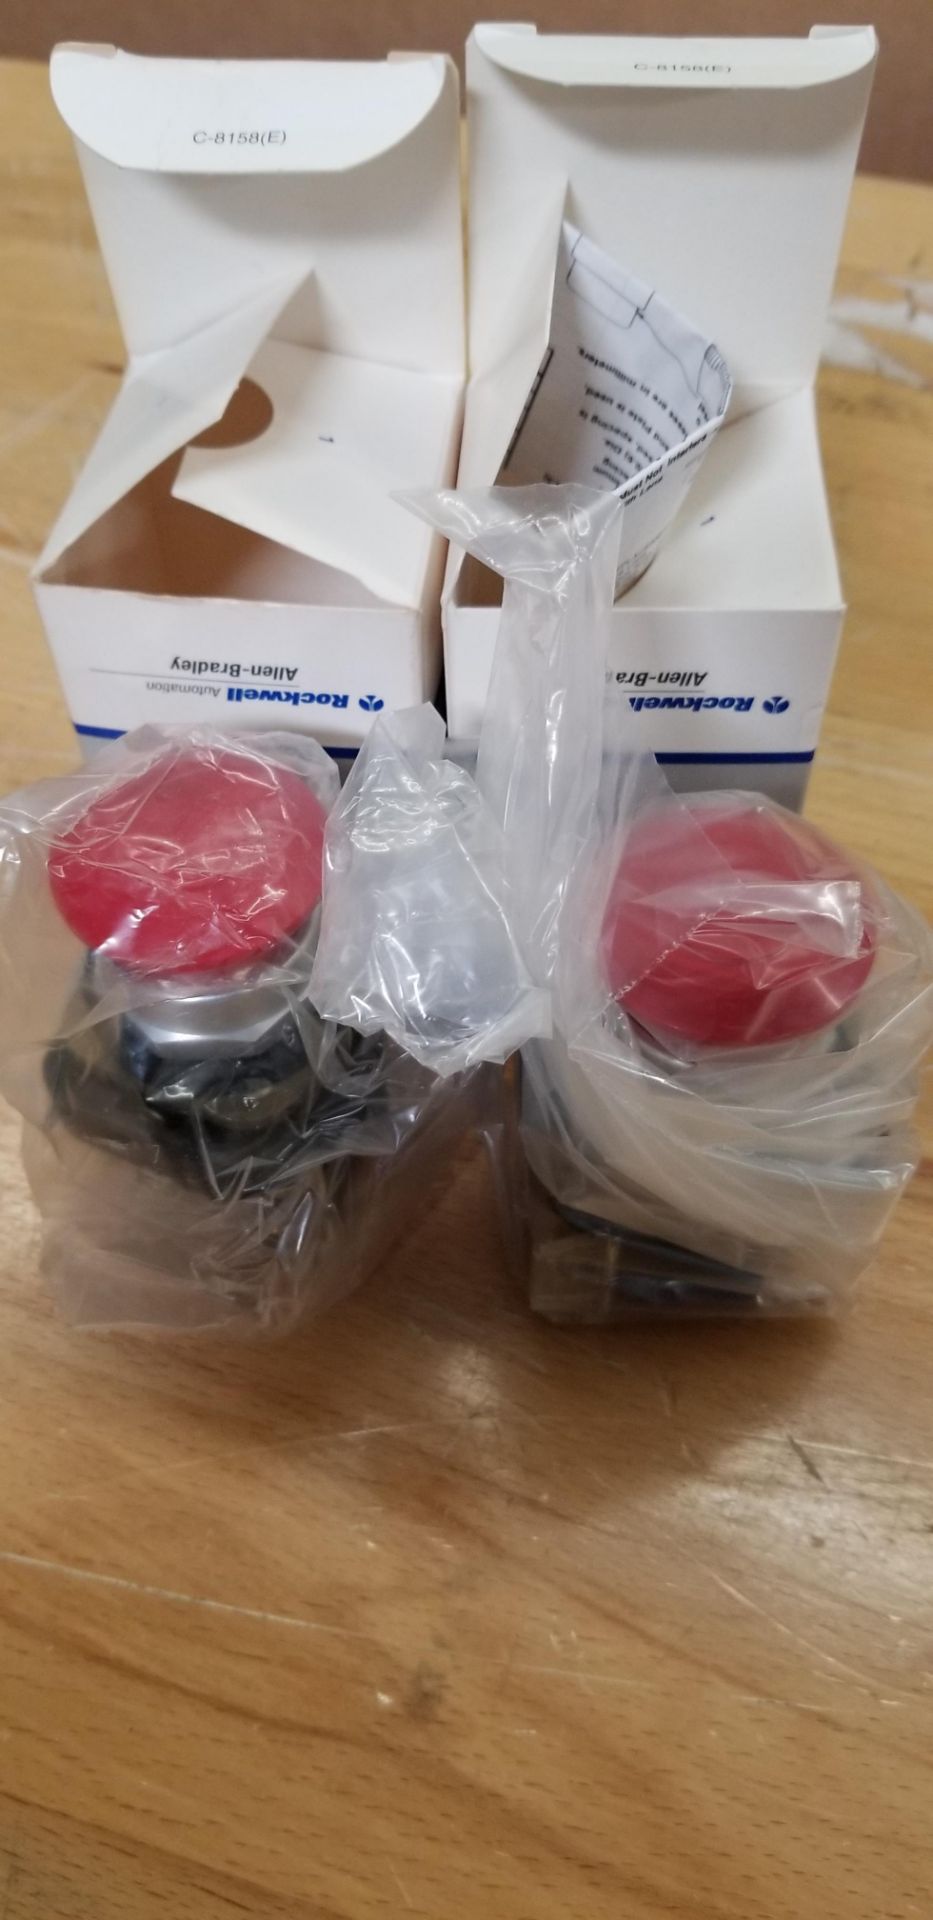 Lot of New Allen Bradley Red Cap Pushbutton - Image 2 of 3